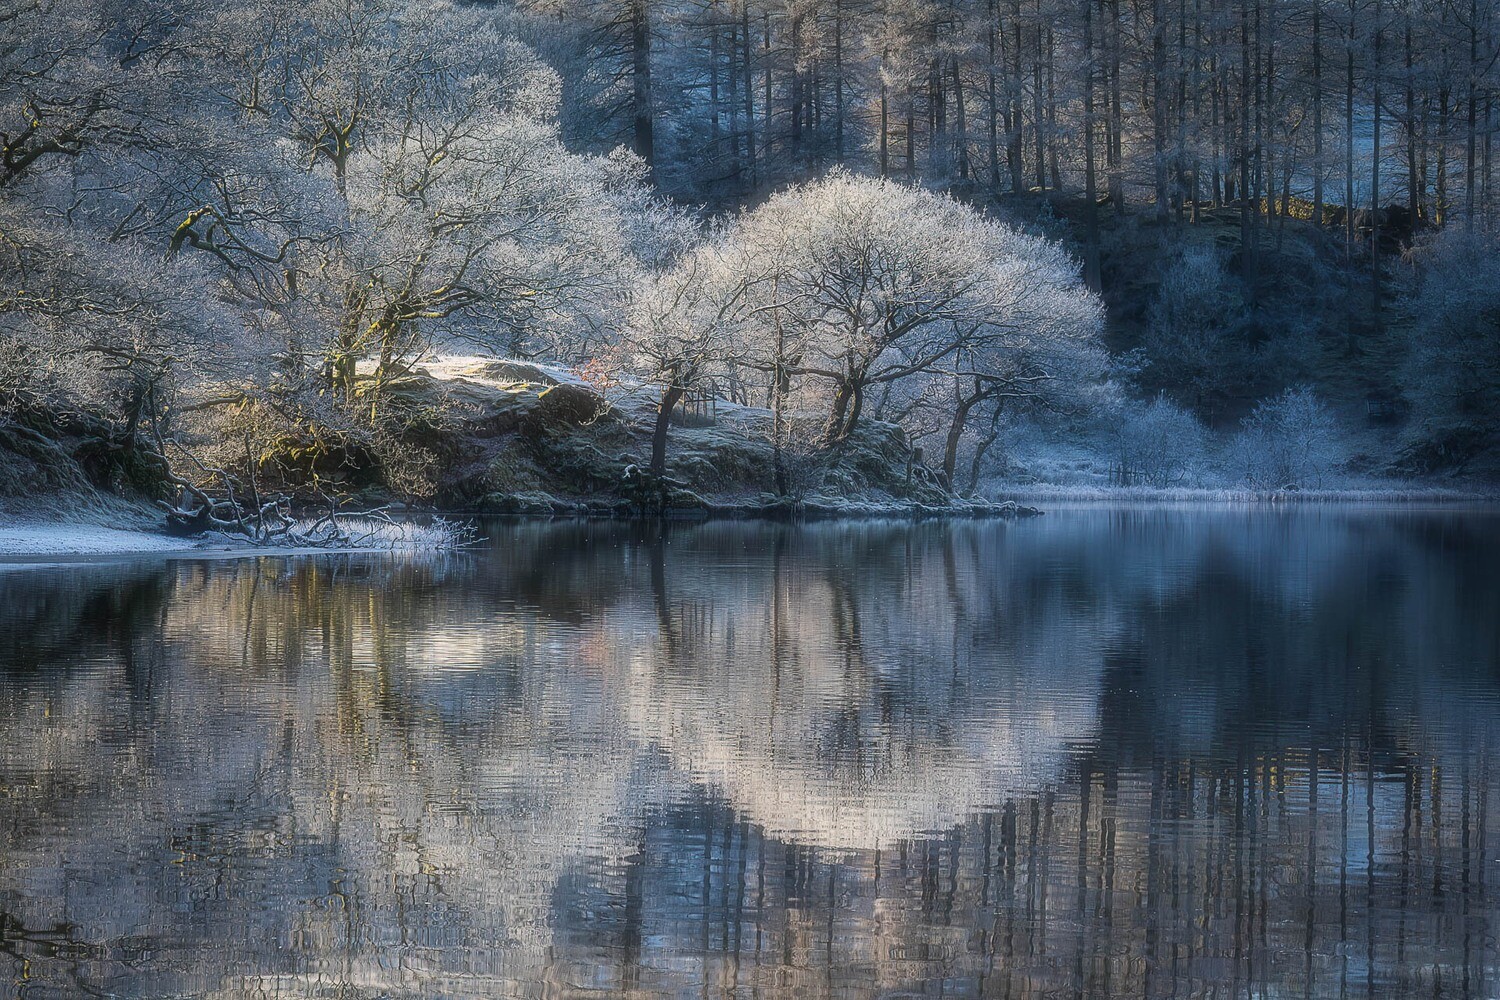 Frosty reflections